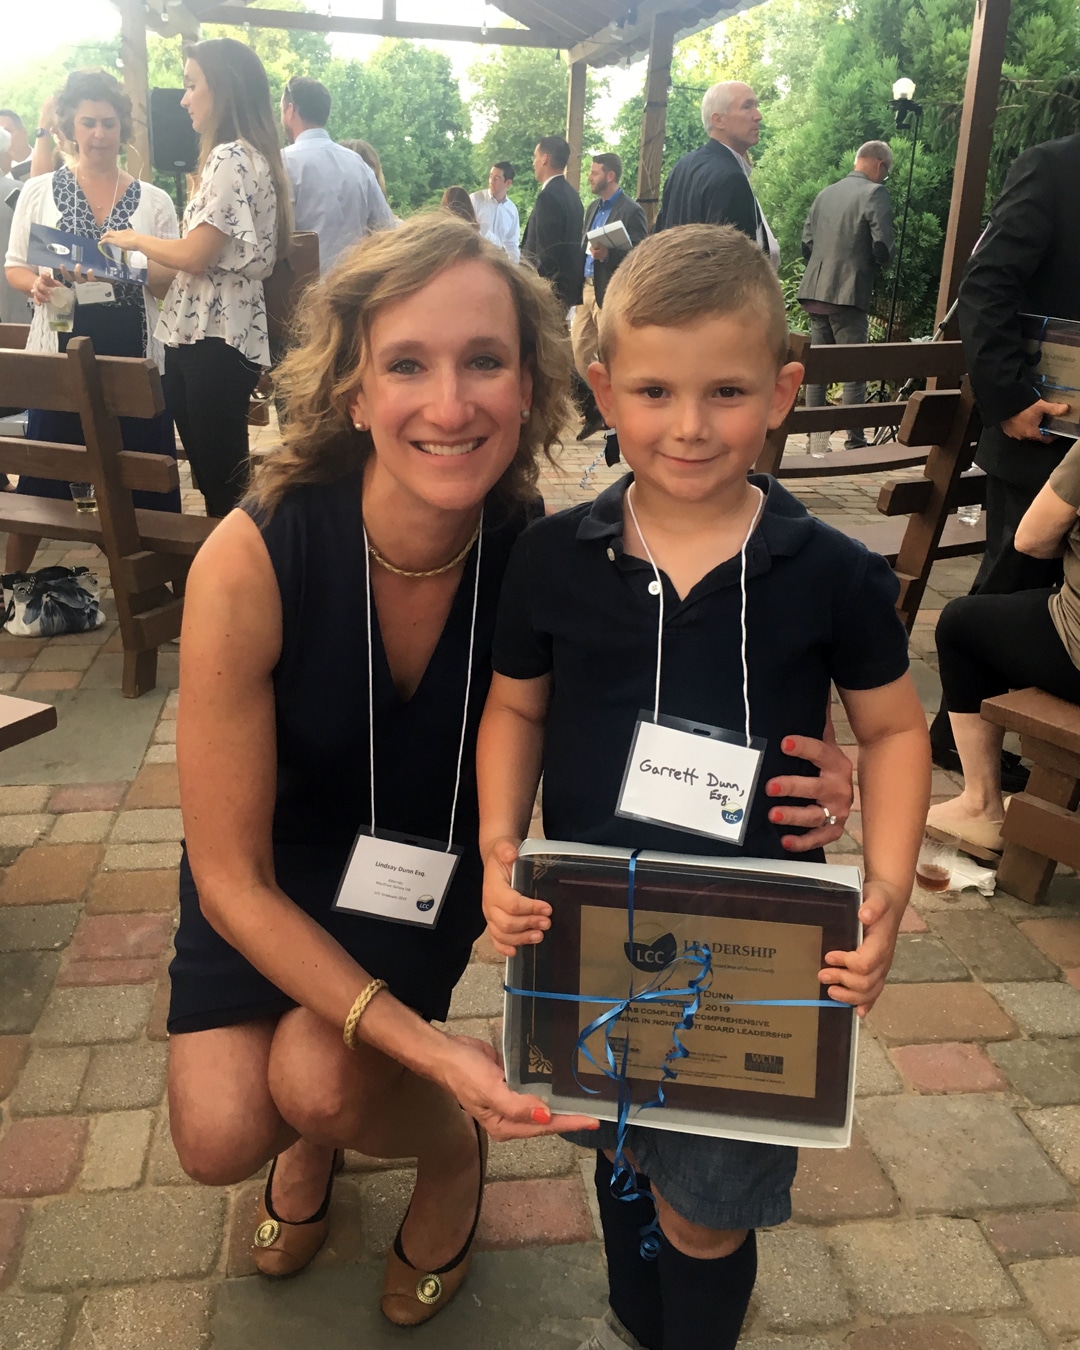 Lindsay Dunn and her son at the 2019 Leadership Chester County Graduation on June 6.